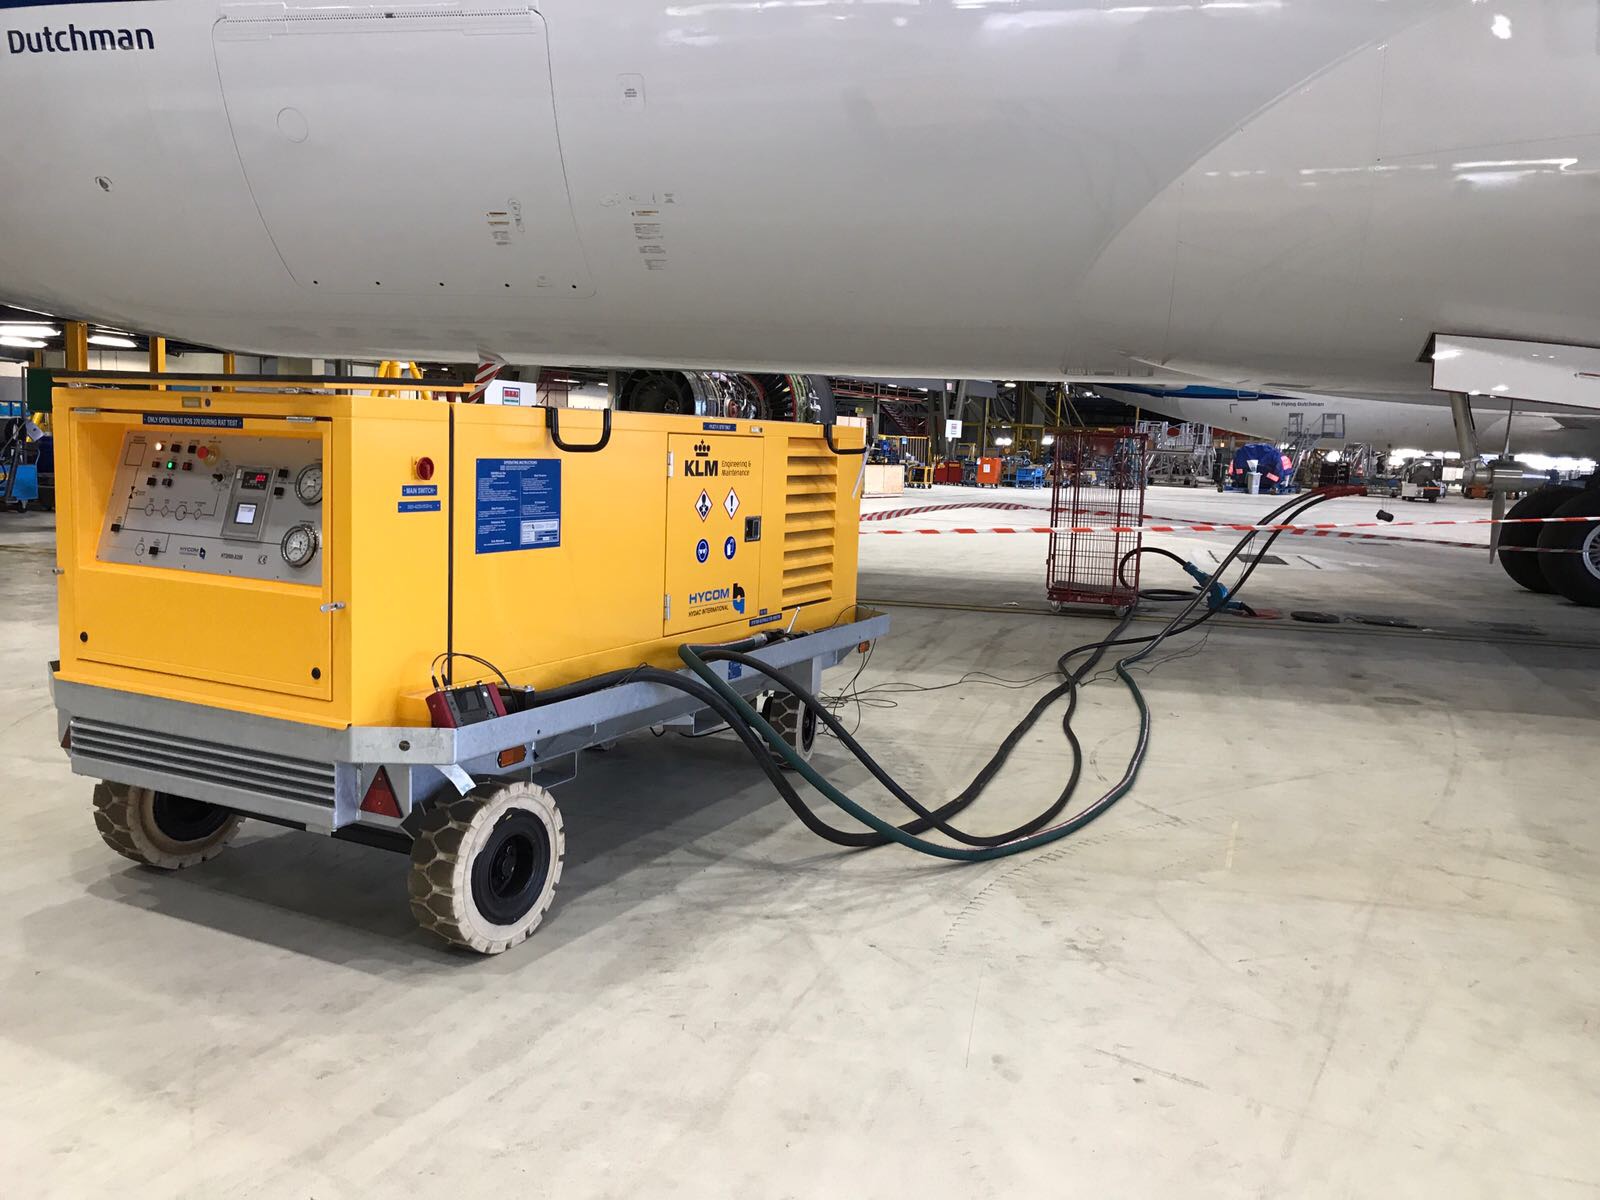 RAT test tool performing a RAT test on a B787 during aircraft maintenance